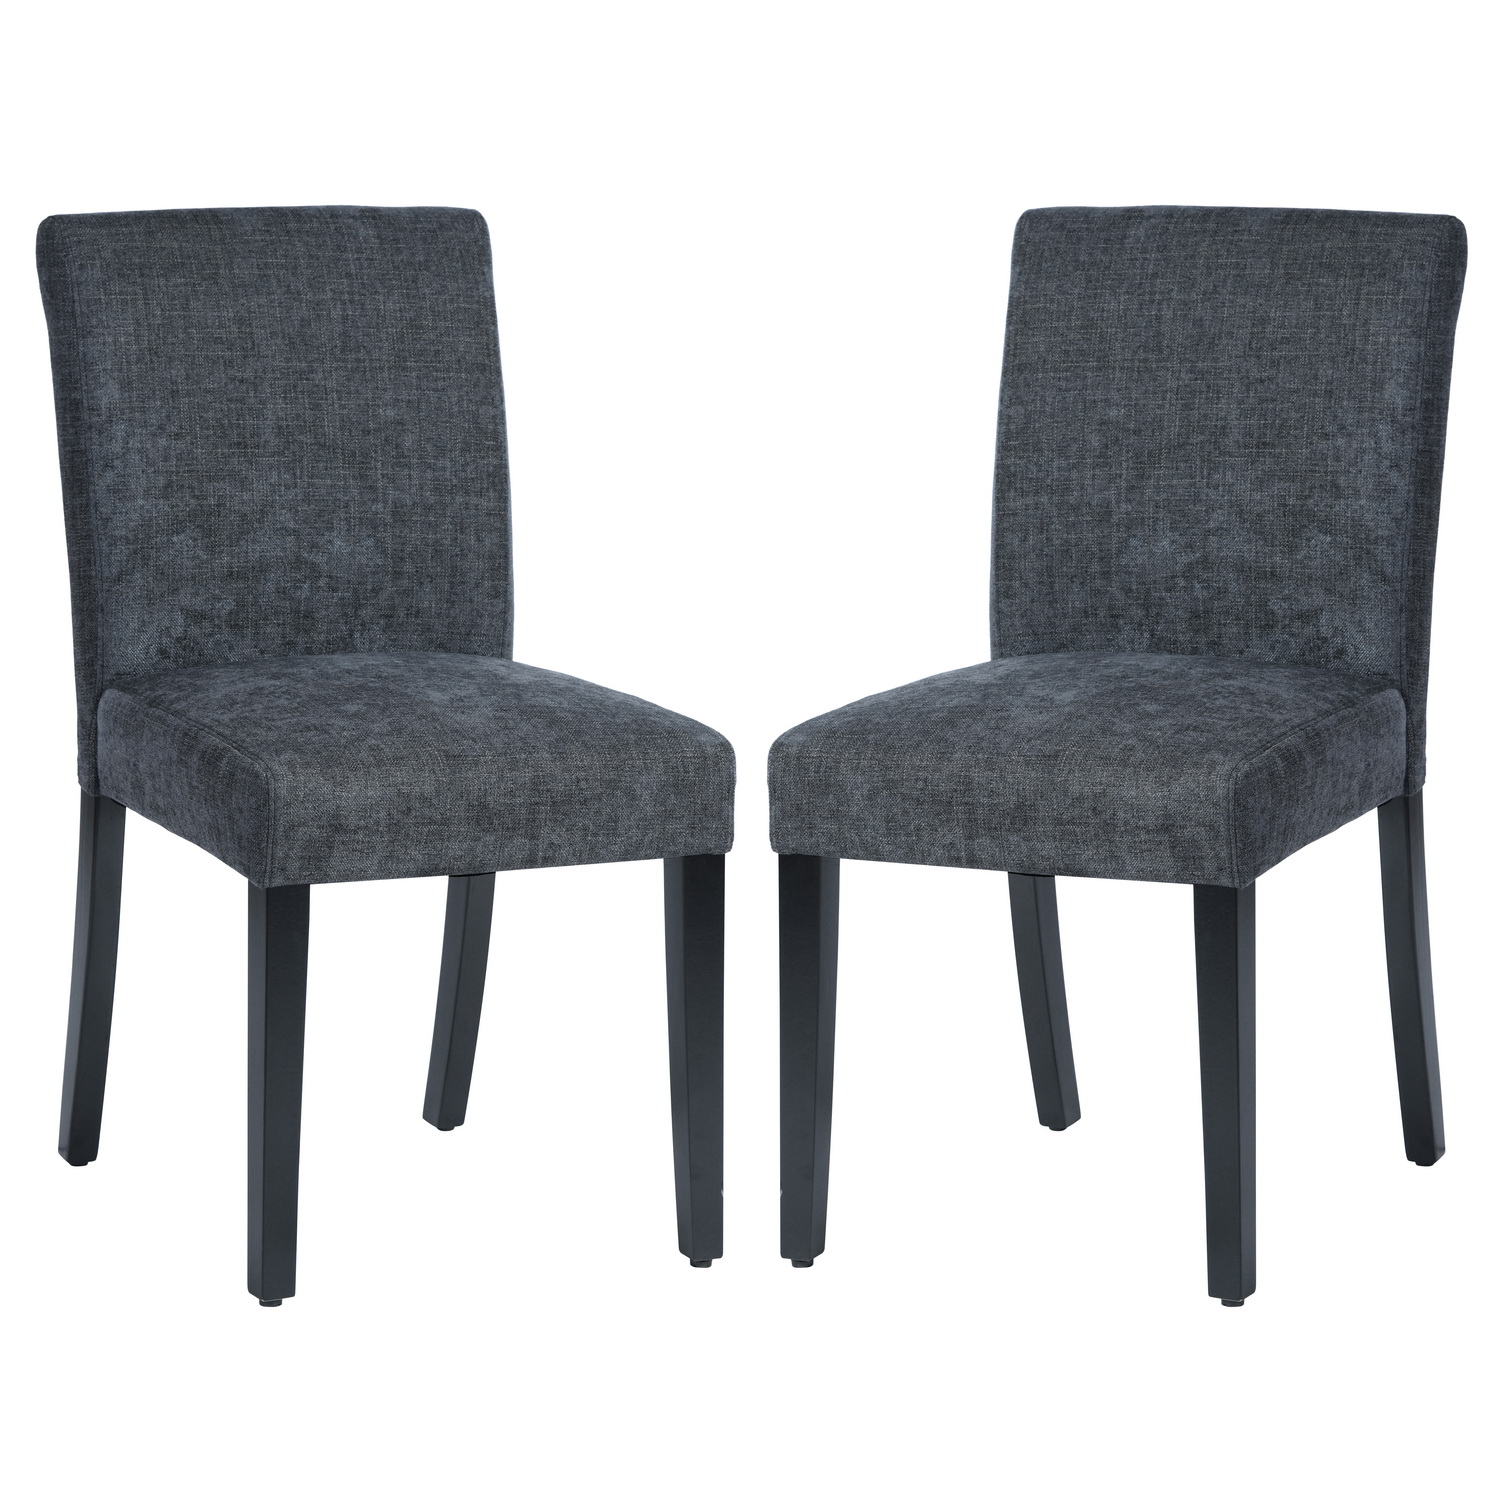 Upholstered Dining Chairs Set of 2 Modern Dining Chairs with Solid Wood Legs, Dark Blue